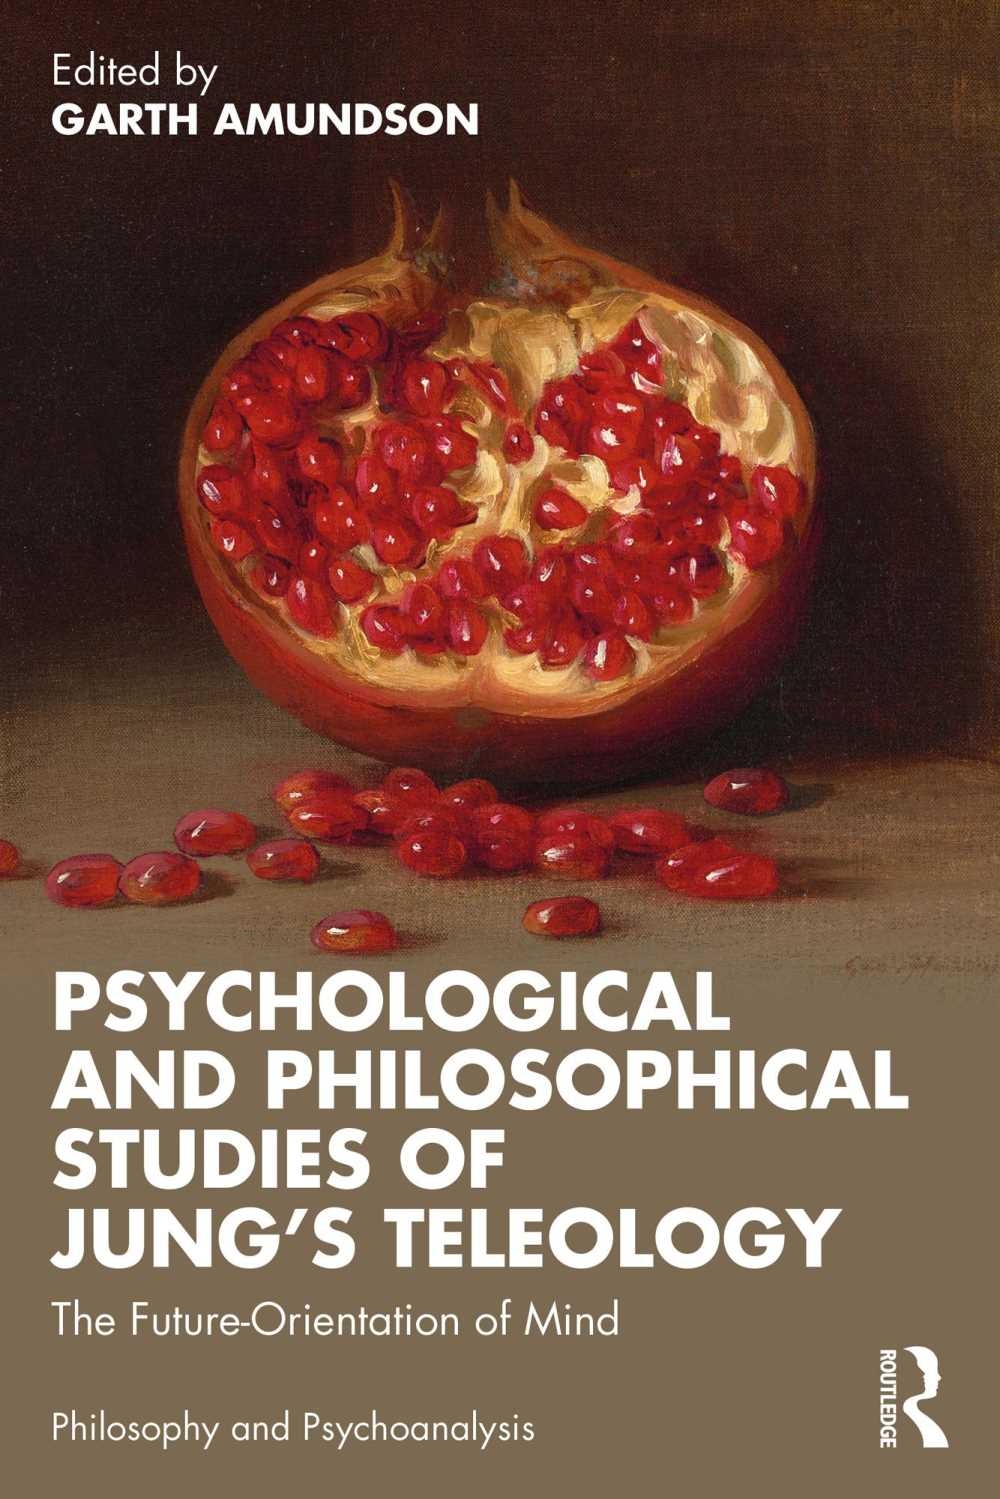 Psychological and Philosophical Studies of Jung’s Teleology: The Future-Orientation of Mind